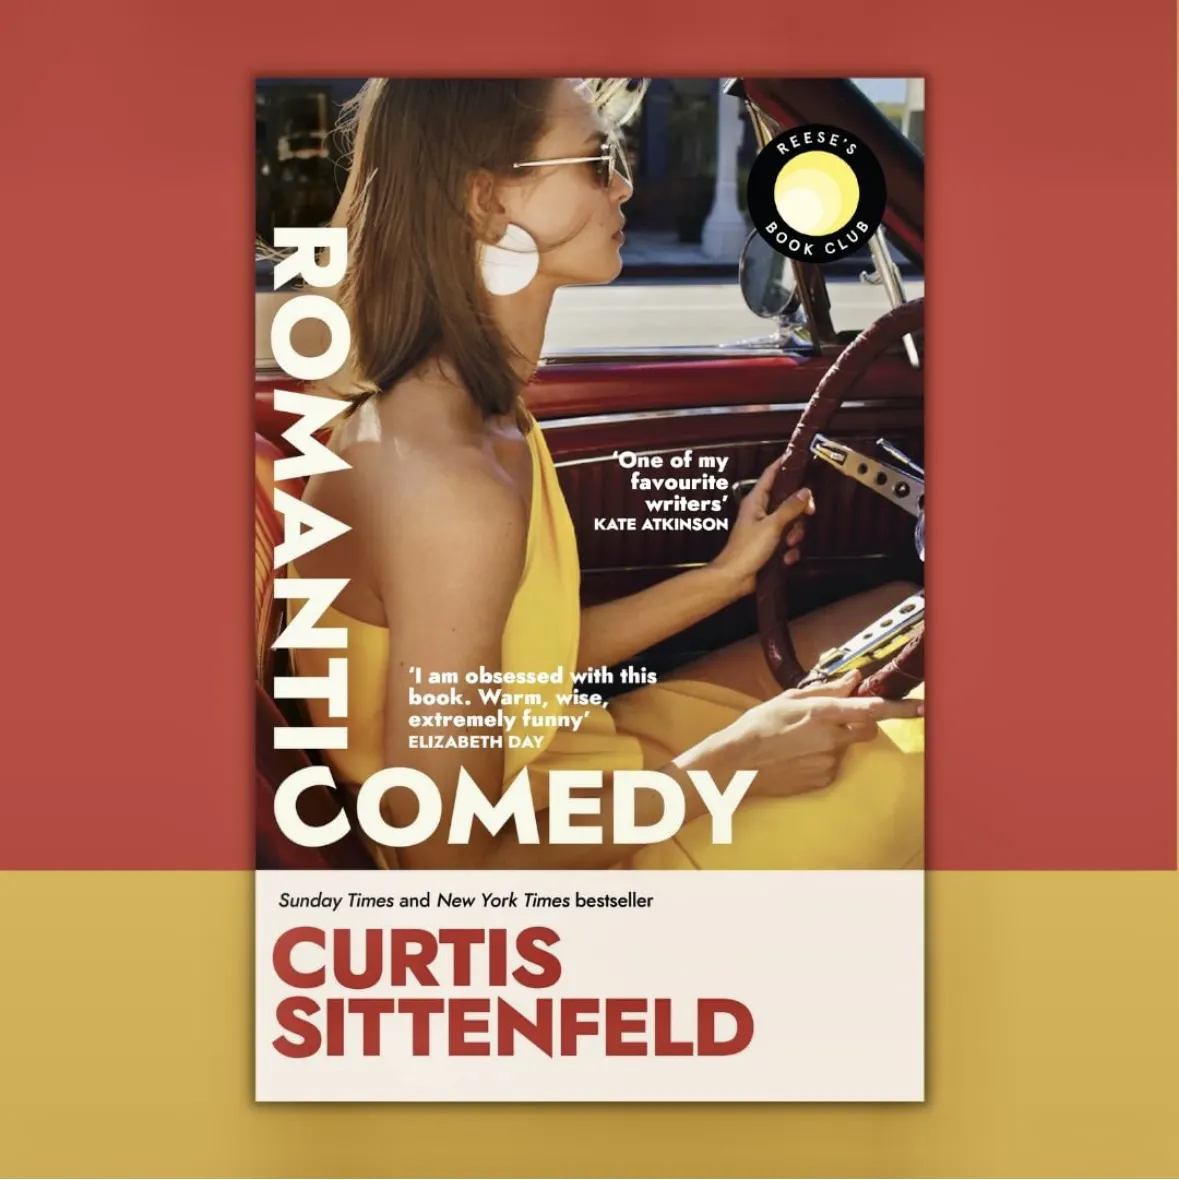 the UK cover of Romantic Comedy by Curtis Sittenfeld